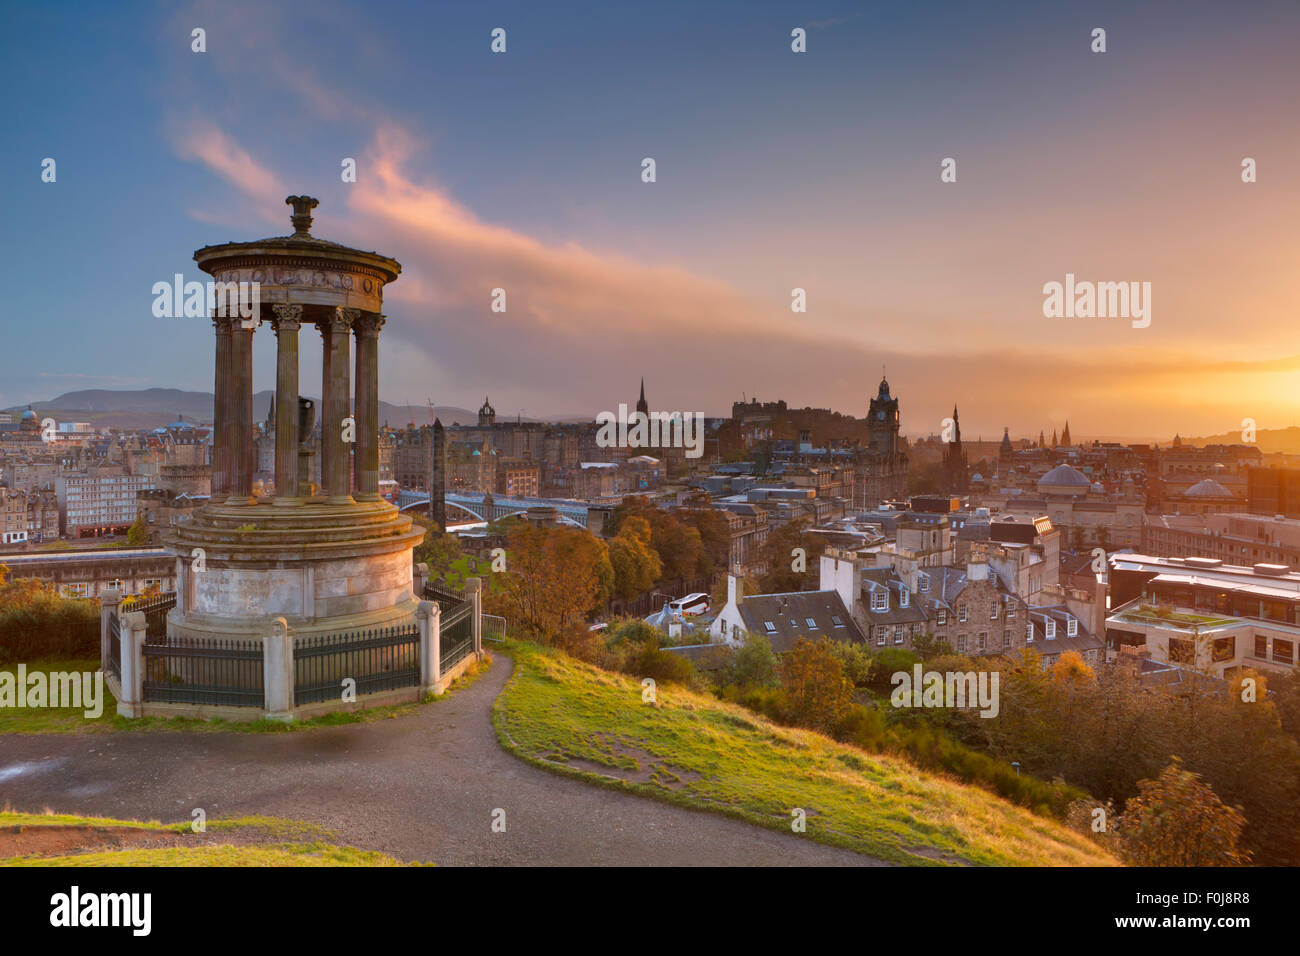 The Edinburgh skyline with the Edinburgh castle in the background. Photographed from Calton Hill at sunset. Stock Photo